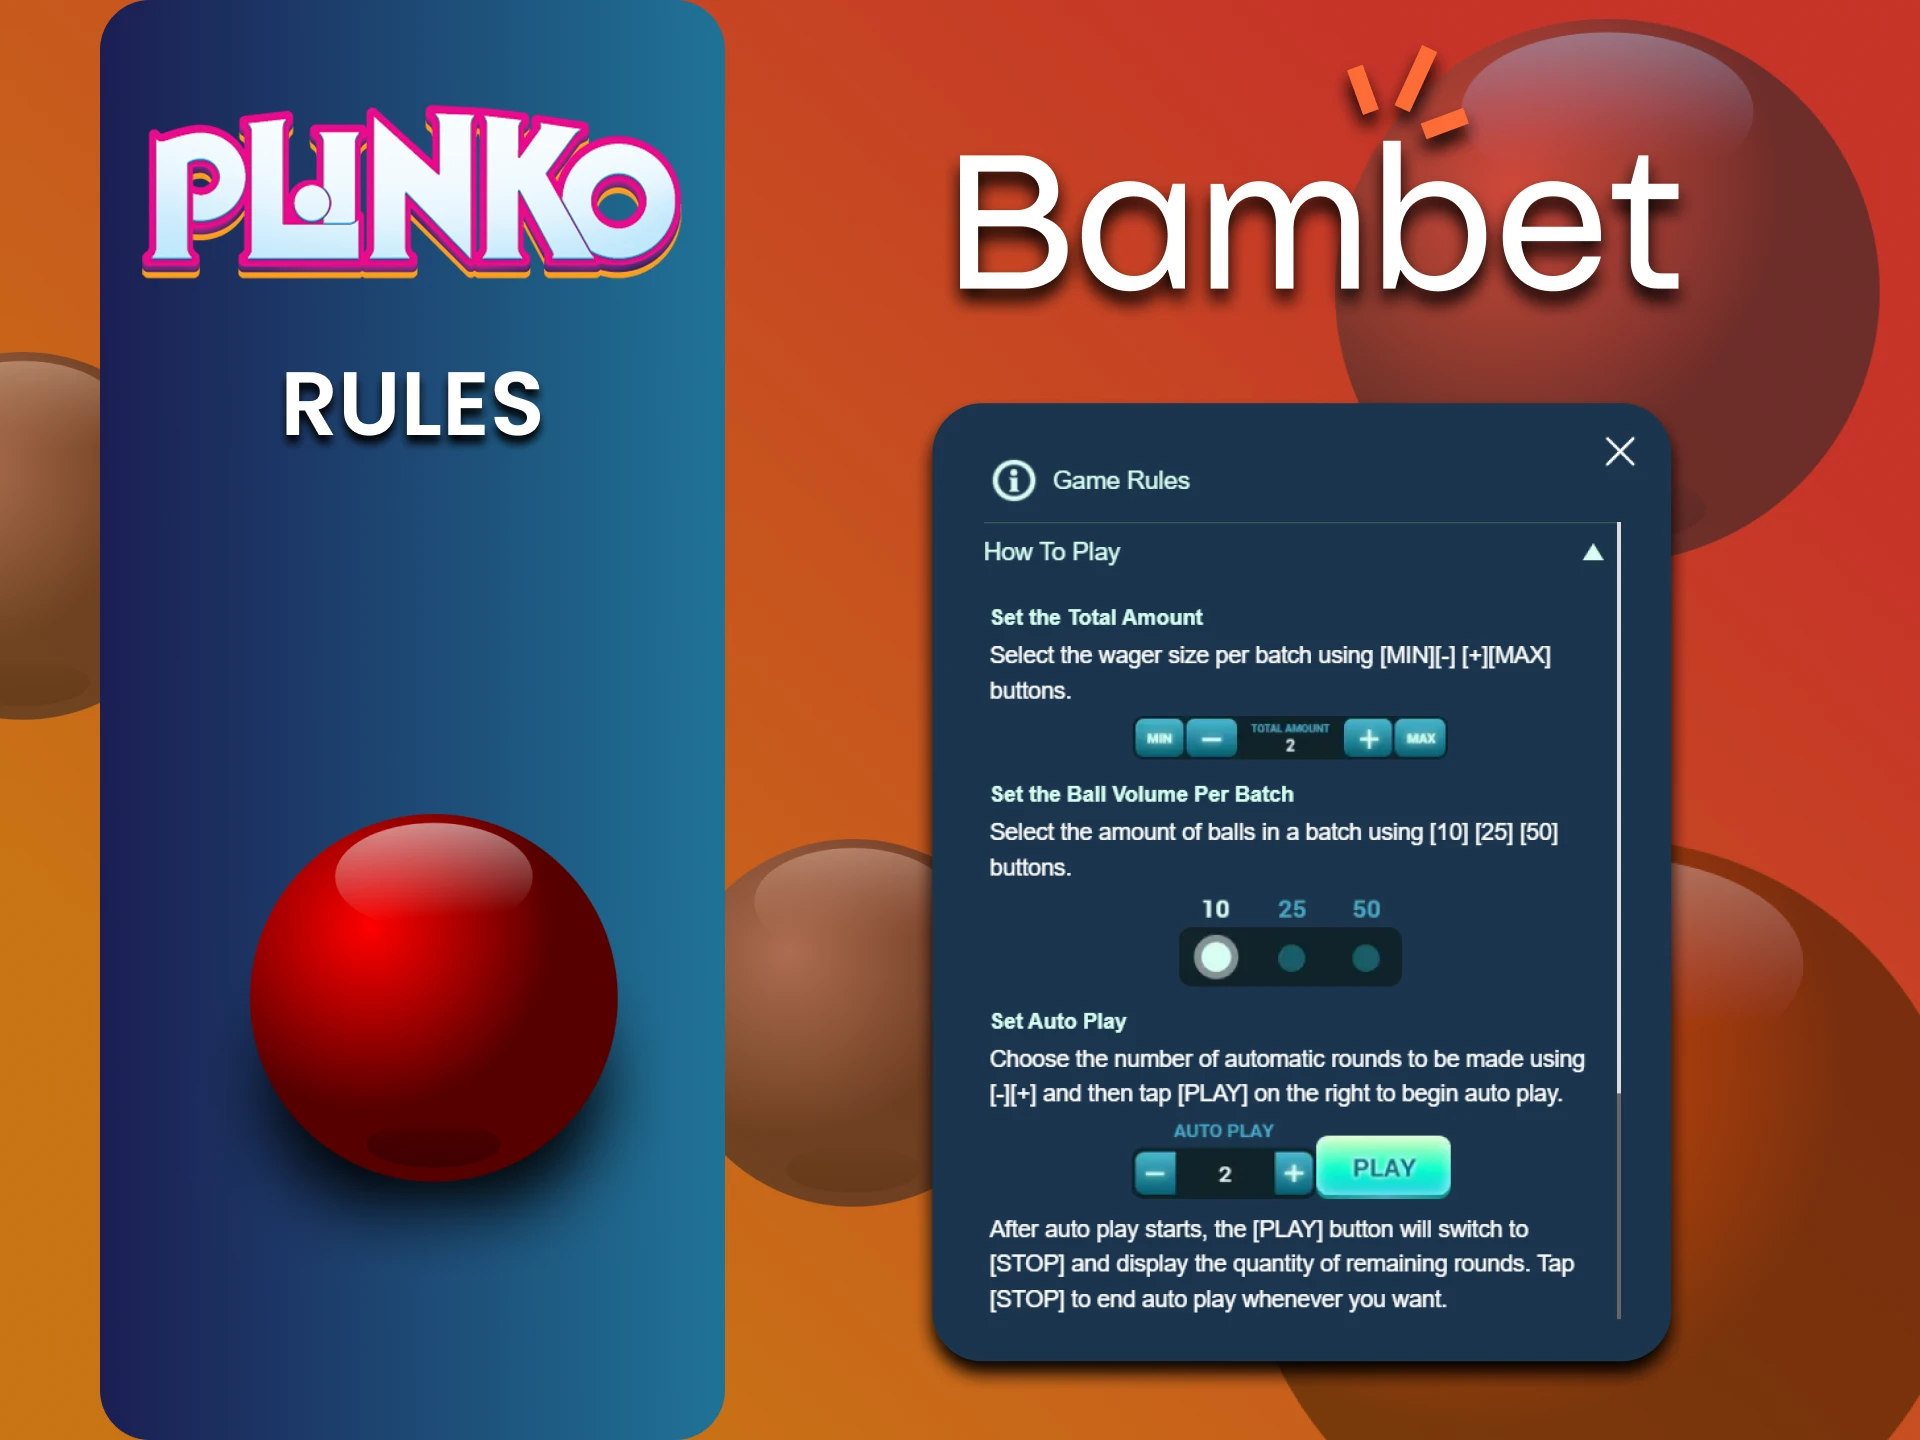 Learn the rules of playing Plinko on Bambet.